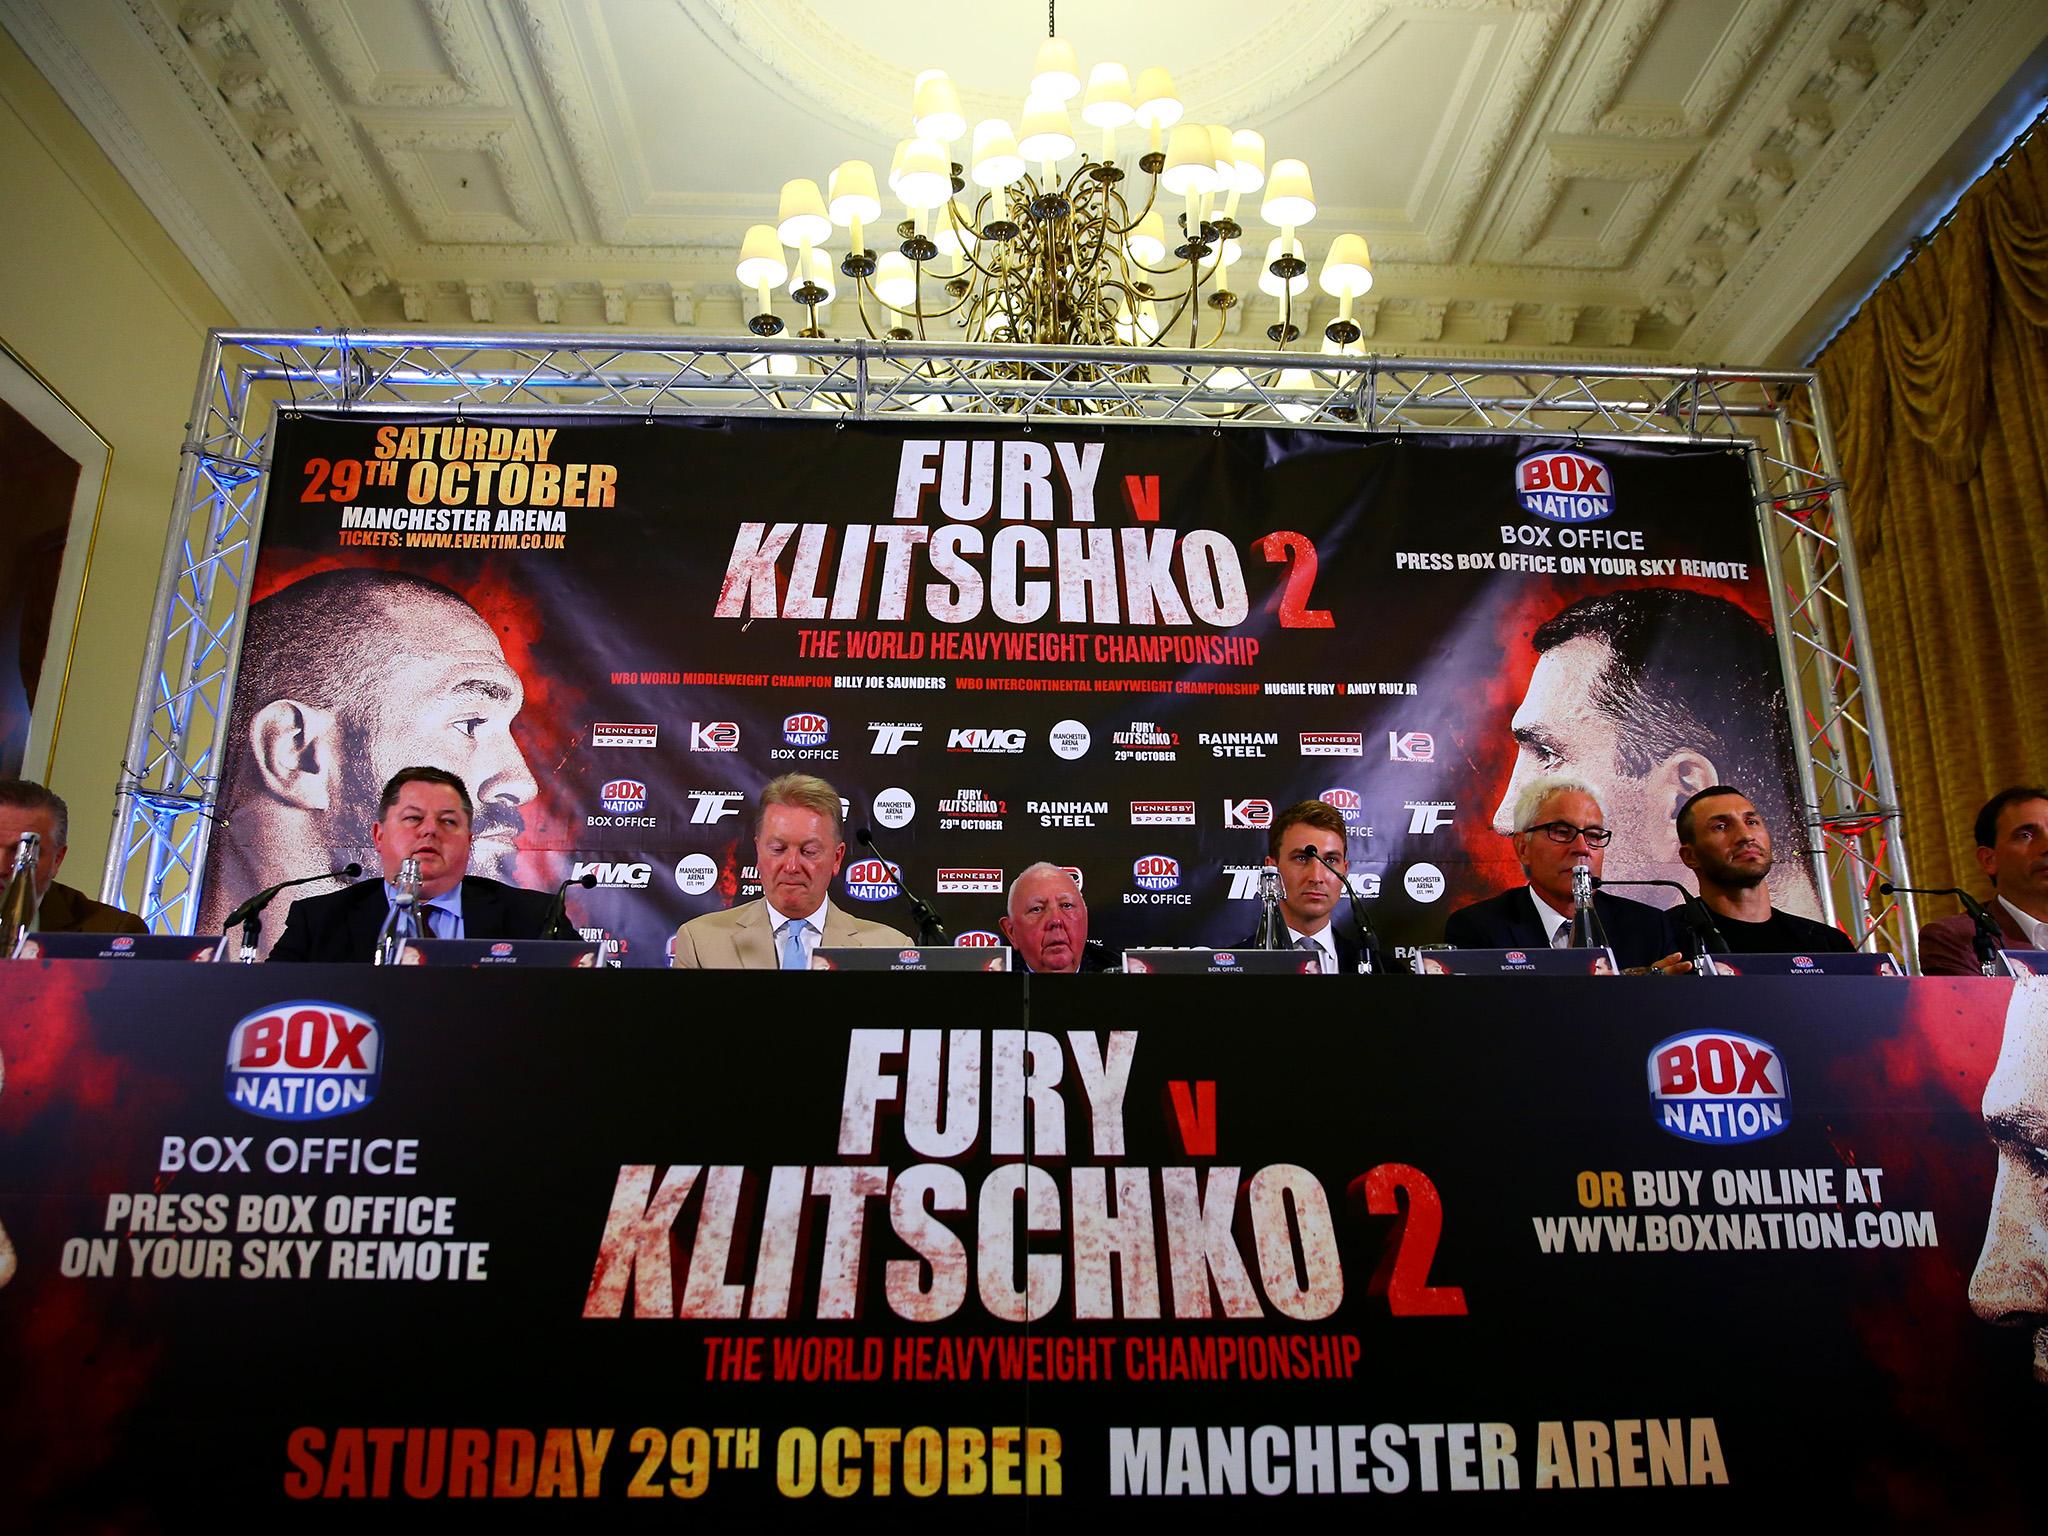 Tyson Fury vs Wladimir Klitsckho II Rematch off again as champion is declared medically unfit The Independent The Independent